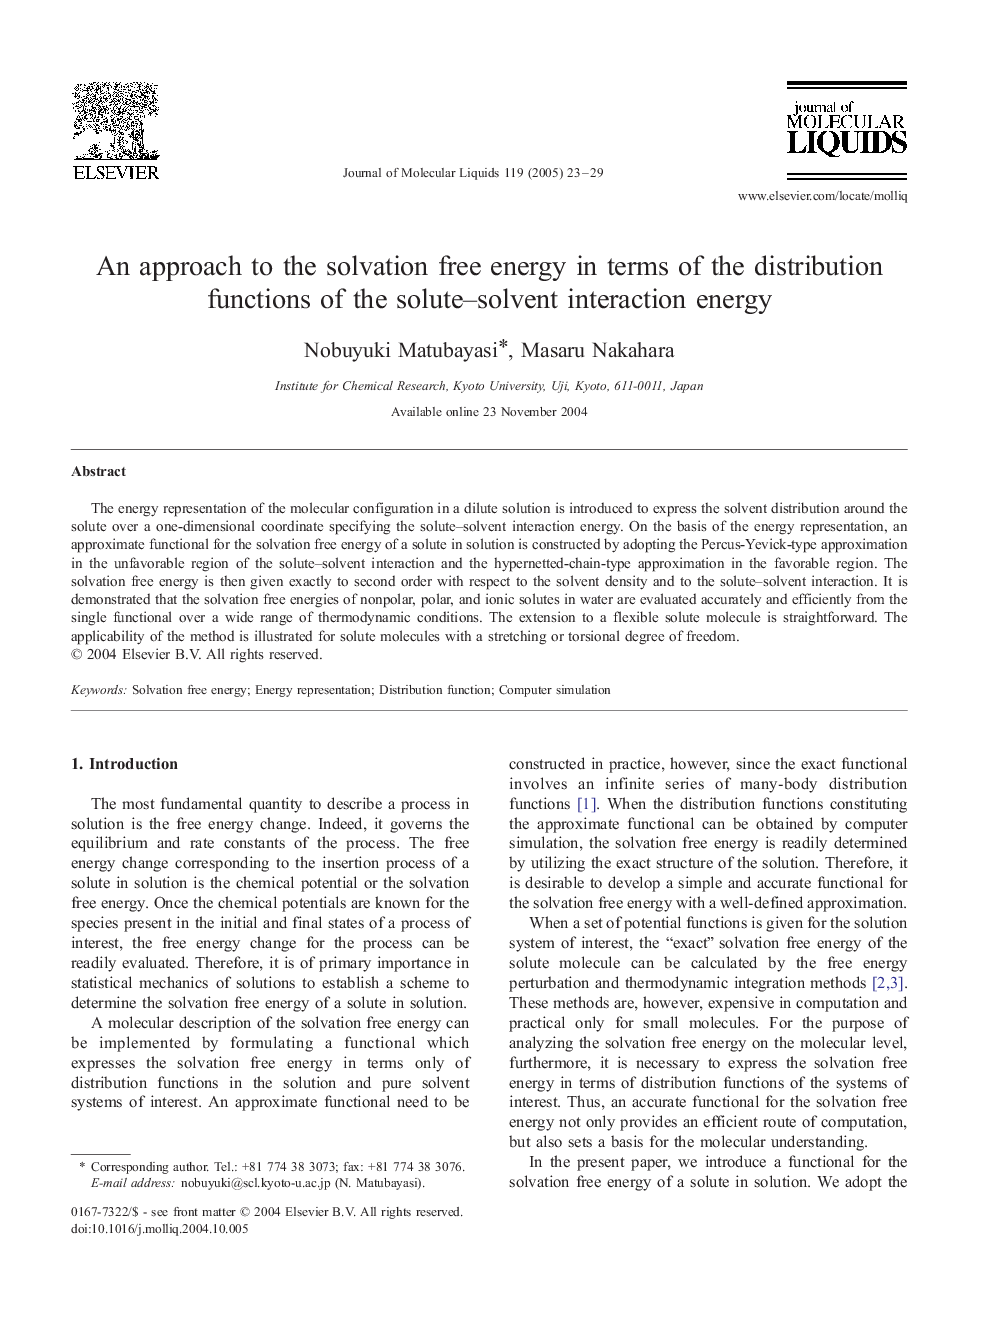 An approach to the solvation free energy in terms of the distribution functions of the solute-solvent interaction energy